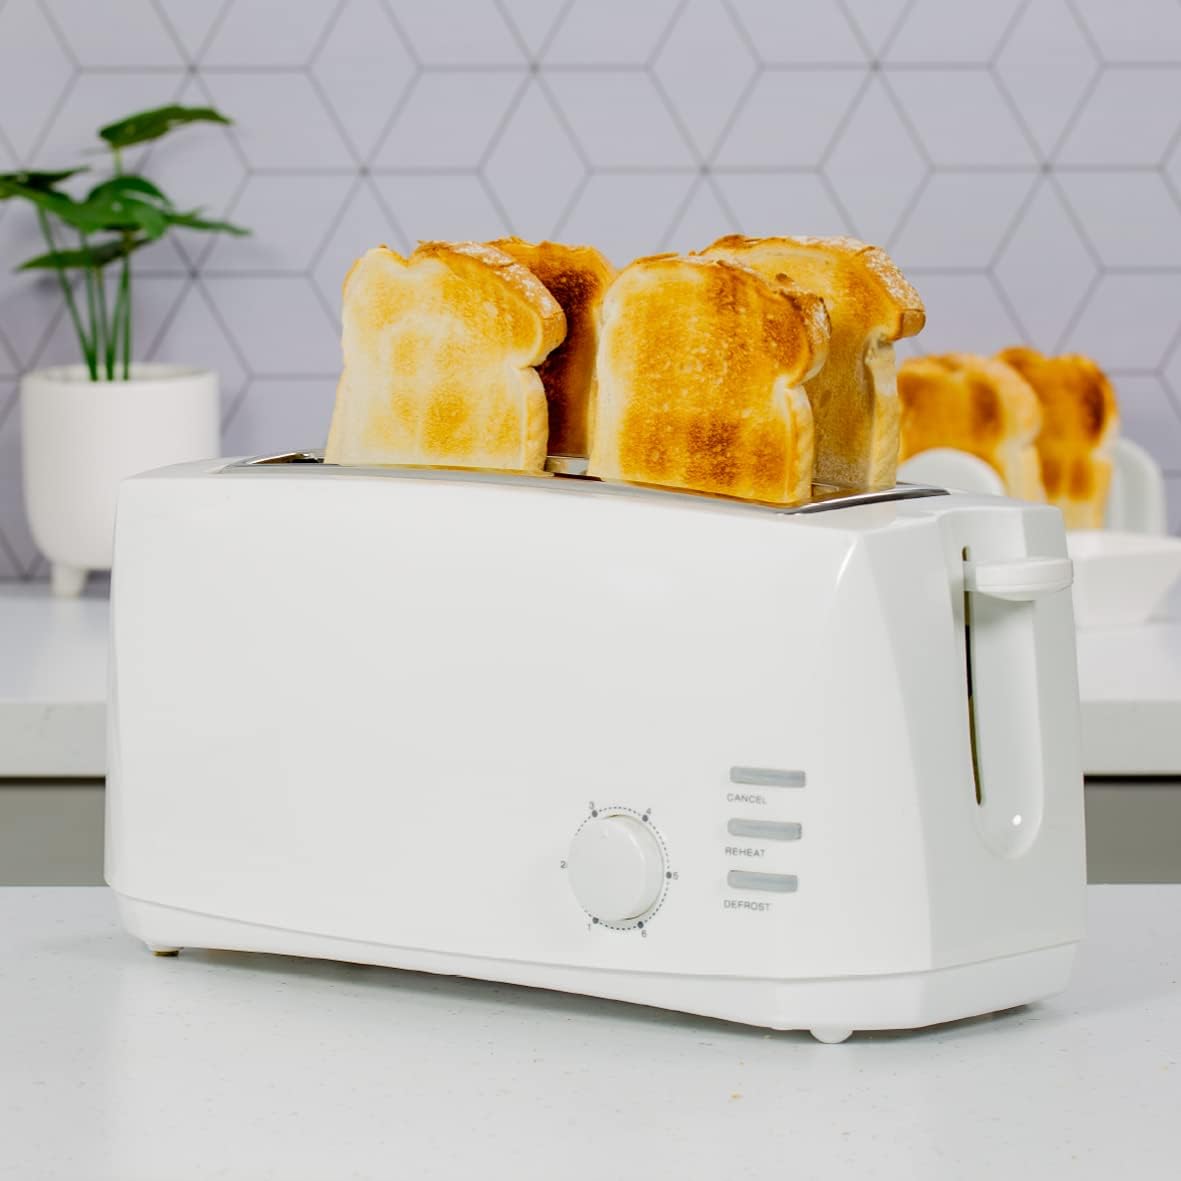 Quest 4 Slice Toaster White - Extra Wide Long Slots for Crumpets and Bagels - 6 Settings - Reheat and Defrost